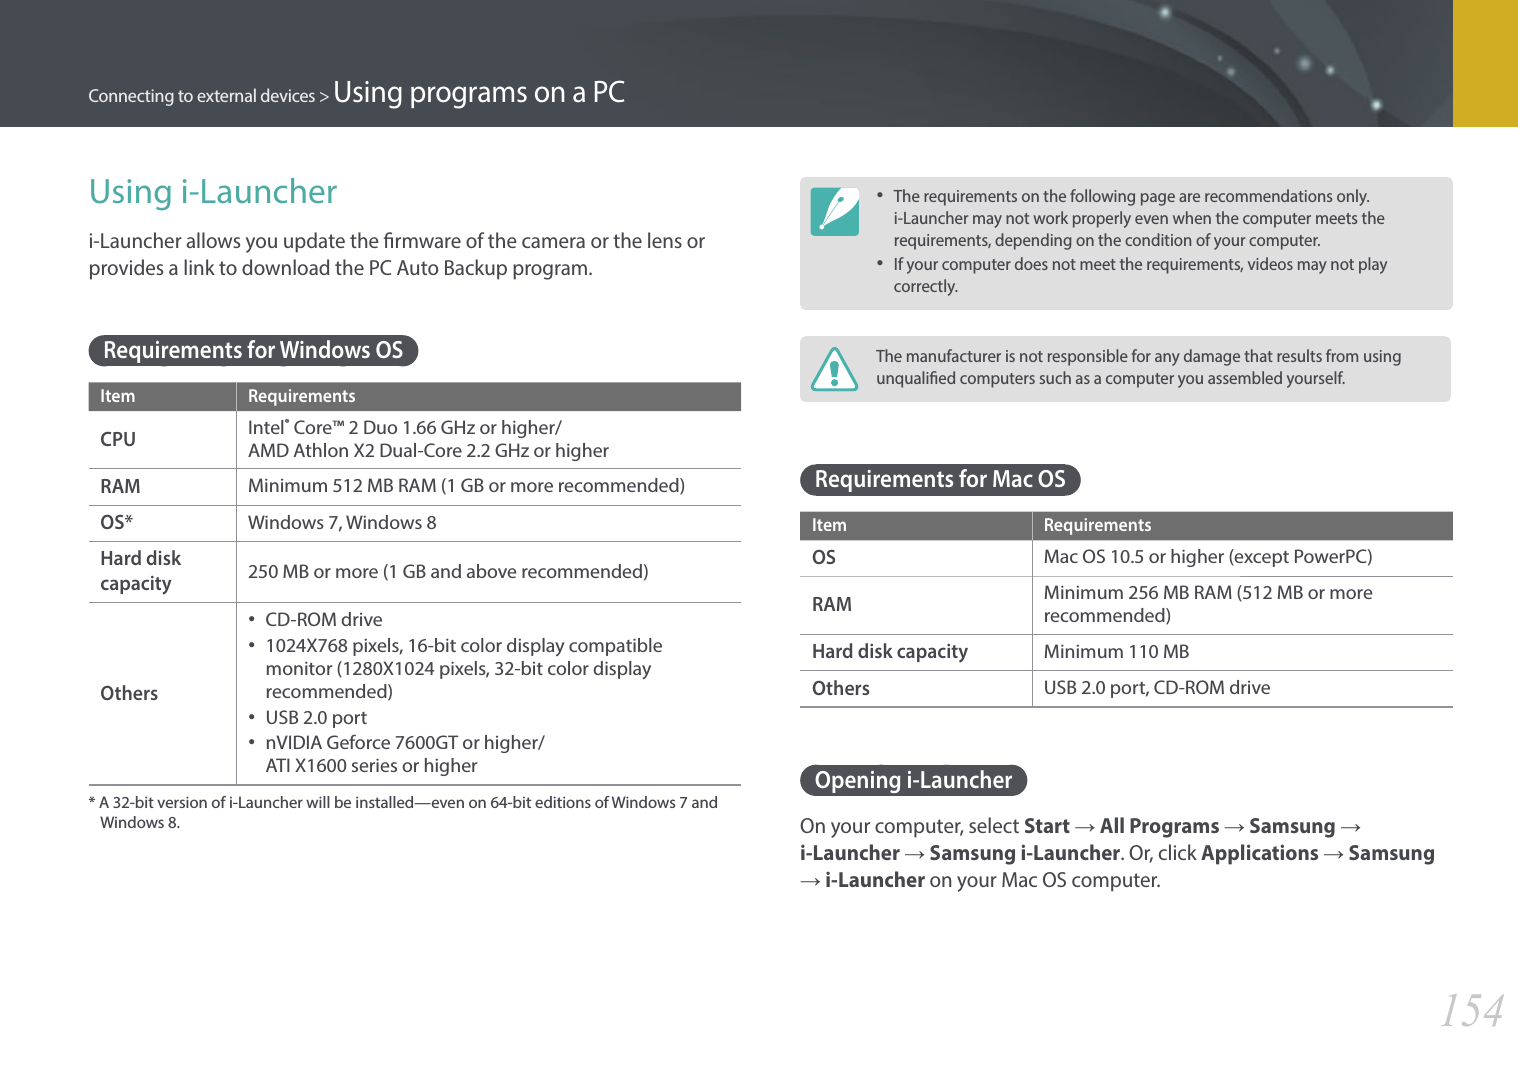 154Connecting to external devices &gt; Using programs on a PCUsing i-Launcheri-Launcher allows you update the rmware of the camera or the lens or provides a link to download the PC Auto Backup program. Requirements for Windows OSItem RequirementsCPUIntel® Core™ 2 Duo 1.66 GHz or higher/  AMD Athlon X2 Dual-Core 2.2 GHz or higherRAMMinimum 512 MB RAM (1 GB or more recommended)OS*Windows 7, Windows 8Hard disk capacity250 MB or more (1 GB and above recommended)Others•  CD-ROM drive•  1024X768 pixels, 16-bit color display compatible monitor (1280X1024 pixels, 32-bit color display recommended)•  USB 2.0 port•  nVIDIA Geforce 7600GT or higher/  ATI X1600 series or higher*  A 32-bit version of i-Launcher will be installed—even on 64-bit editions of Windows 7 and Windows 8. • The requirements on the following page are recommendations only. i-Launcher may not work properly even when the computer meets the requirements, depending on the condition of your computer.• If your computer does not meet the requirements, videos may not play correctly.The manufacturer is not responsible for any damage that results from using unqualied computers such as a computer you assembled yourself.Requirements for Mac OSItem RequirementsOSMac OS 10.5 or higher (except PowerPC)RAMMinimum 256 MB RAM (512 MB or more recommended)Hard disk capacityMinimum 110 MBOthersUSB 2.0 port, CD-ROM driveOpening i-LauncherOn your computer, select Start ĺ All Programs ĺ Samsung ĺ i-Launcher ĺ Samsung i-Launcher. Or, click Applications ĺ Samsung ĺ i-Launcher on your Mac OS computer.